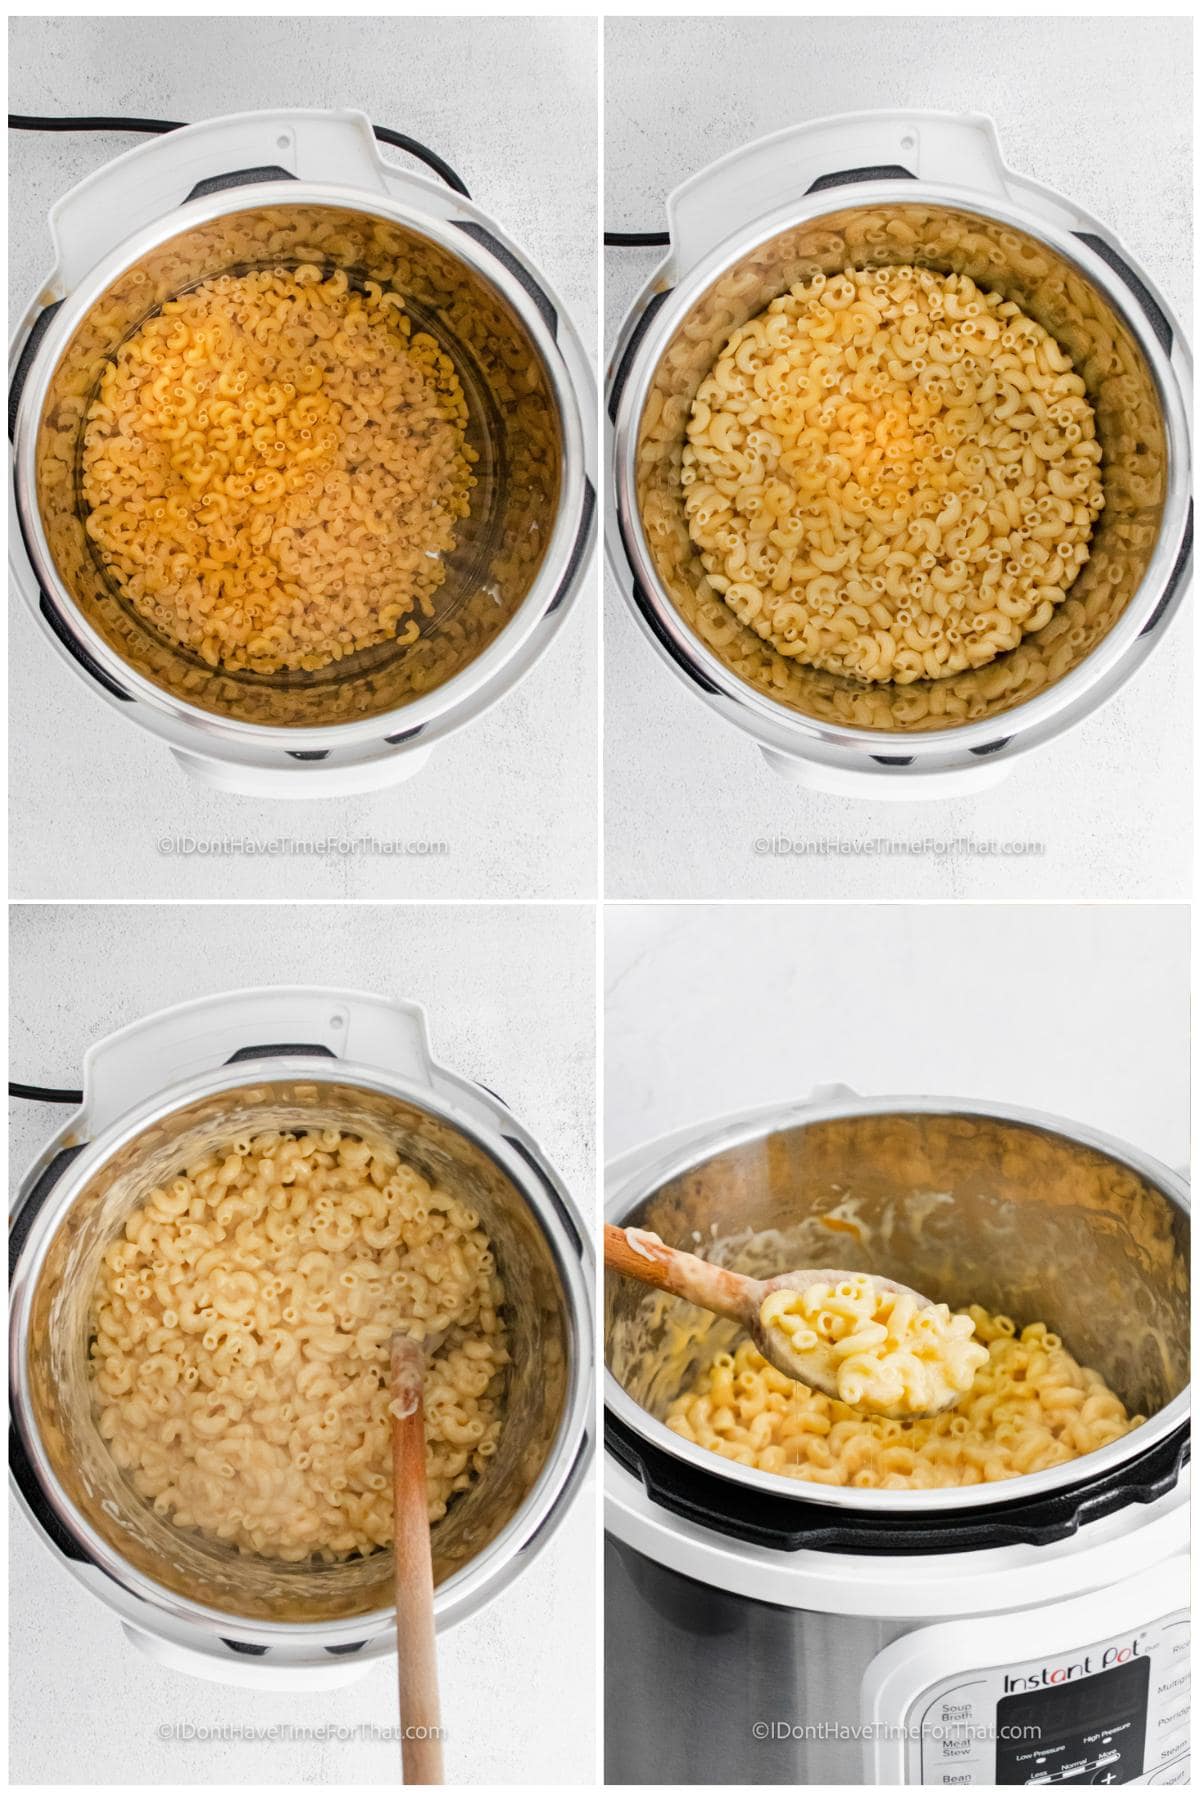 process of adding ingredients together to make Instant Pot Mac and Cheese